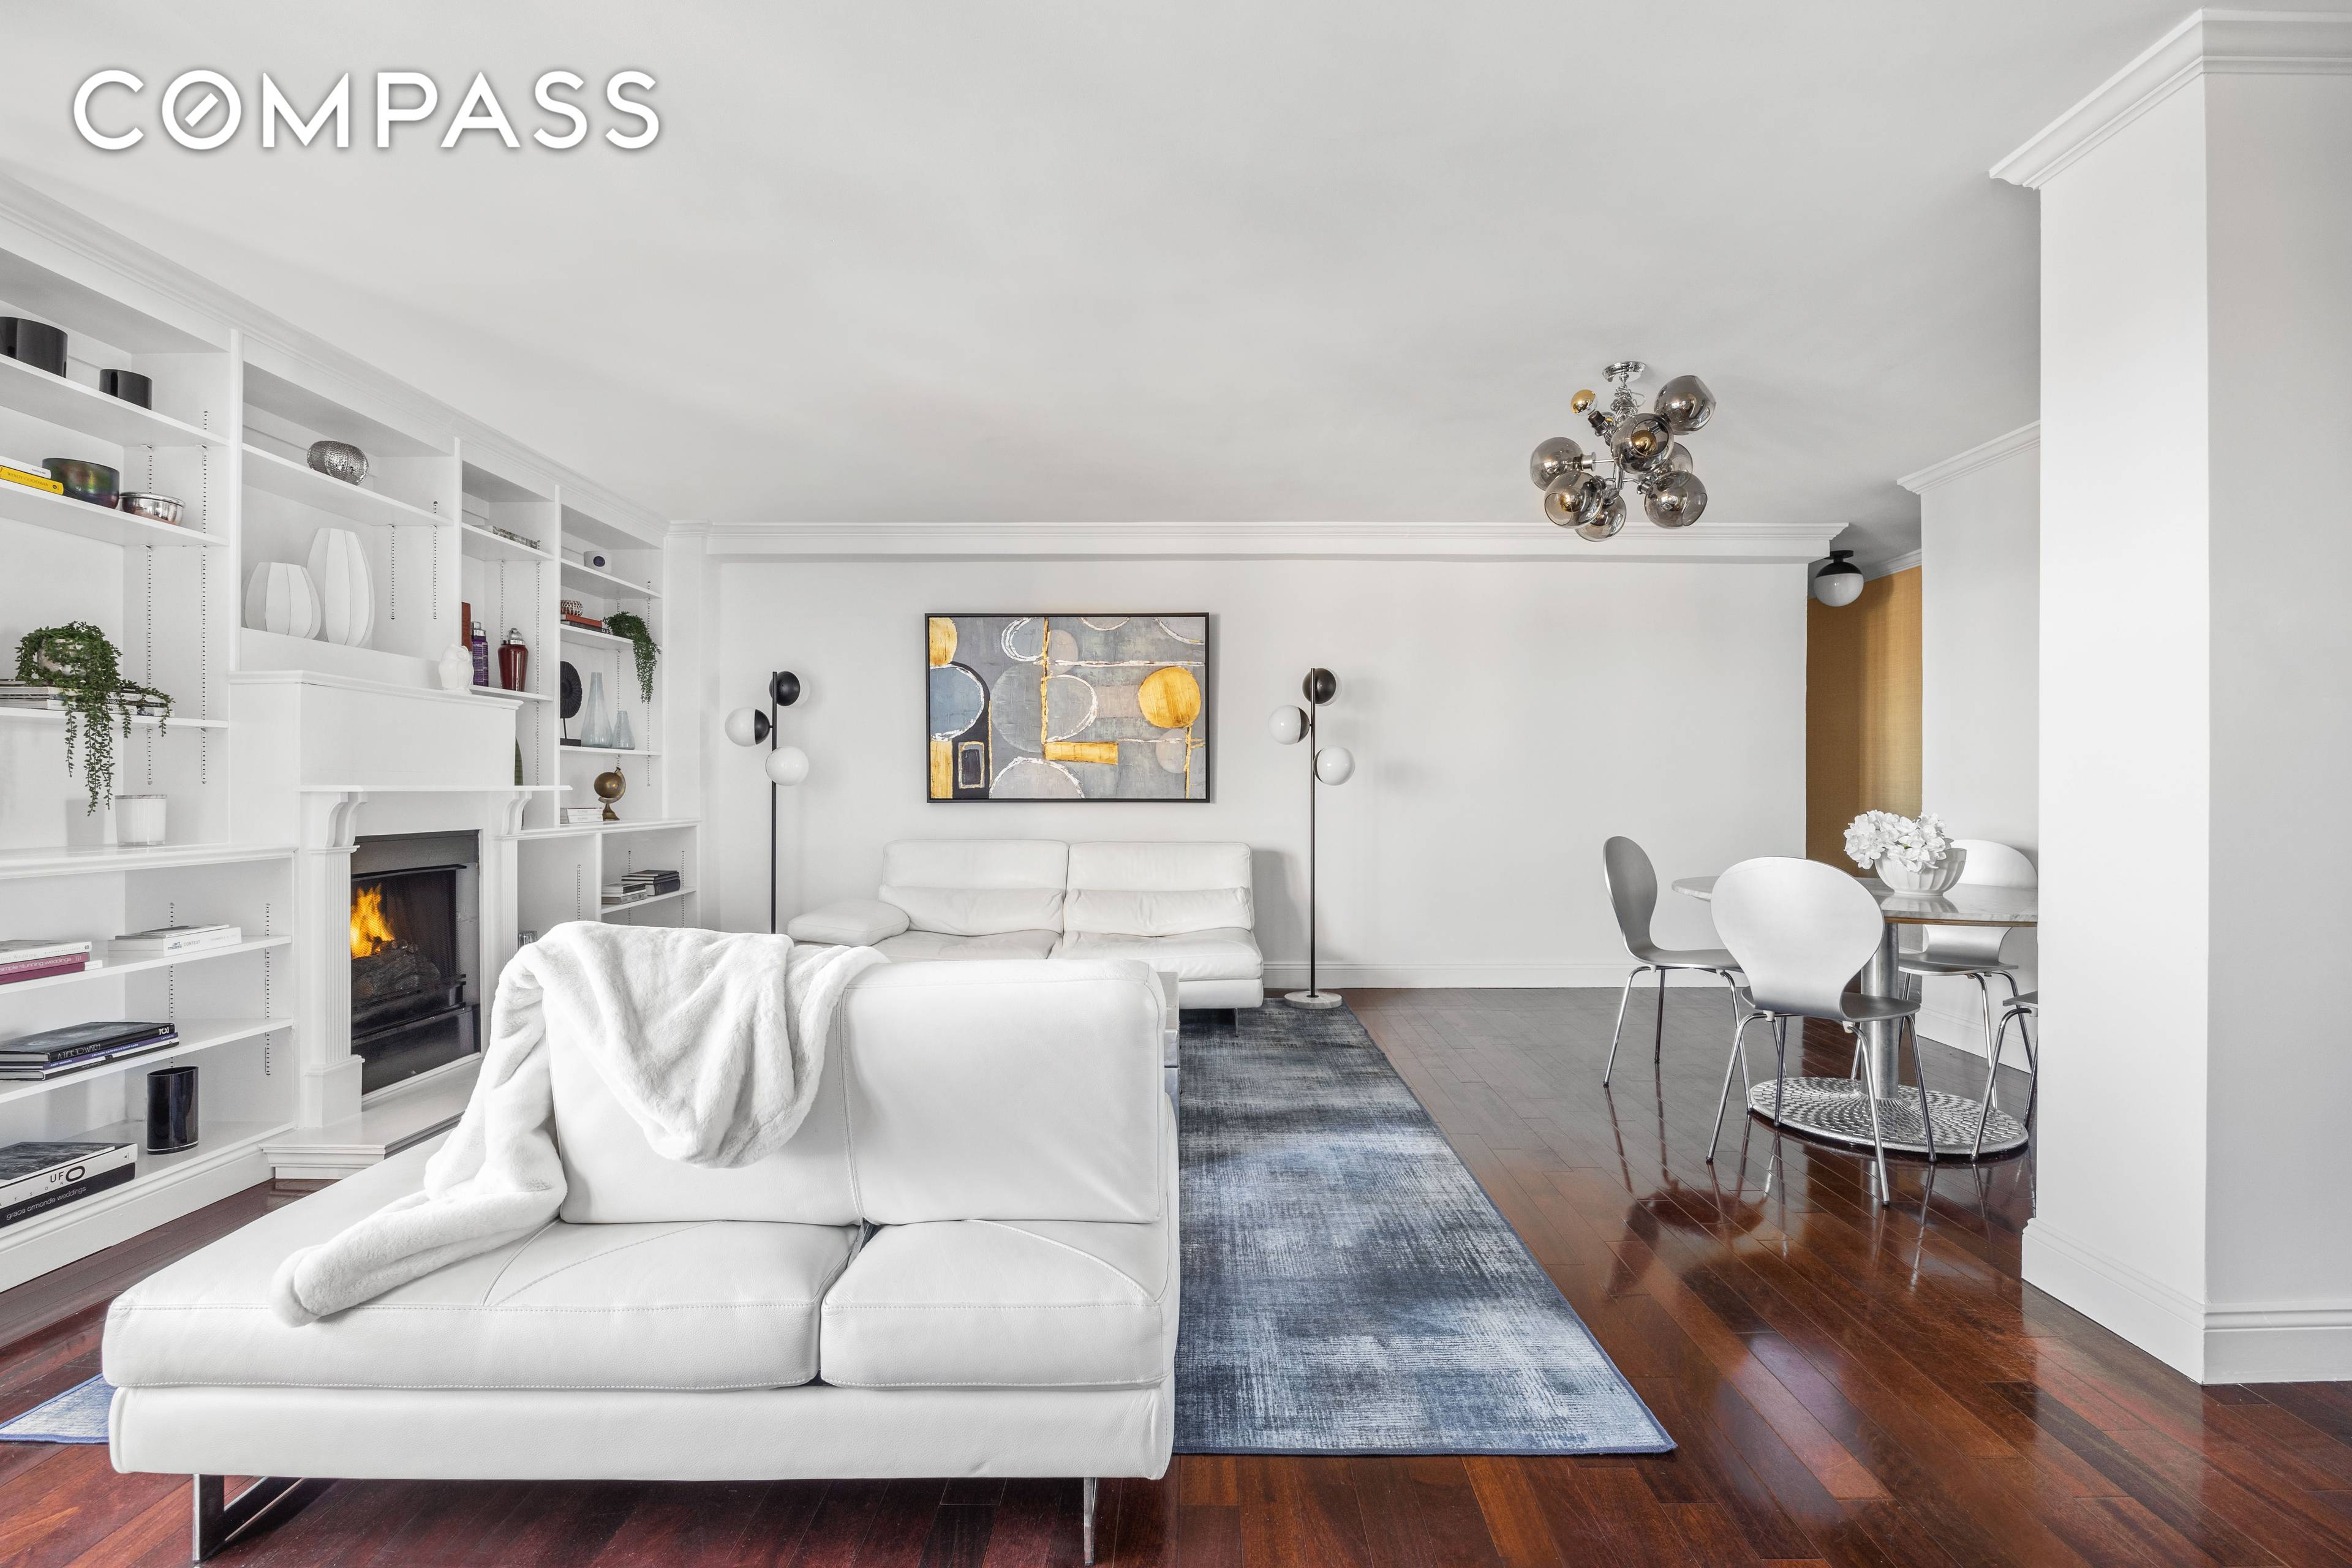 This spacious 18th floor 3 bedroom, 2 bathroom apartment has extraordinary East River and iconic Midtown views including the Empire State Building and Chrysler Building.